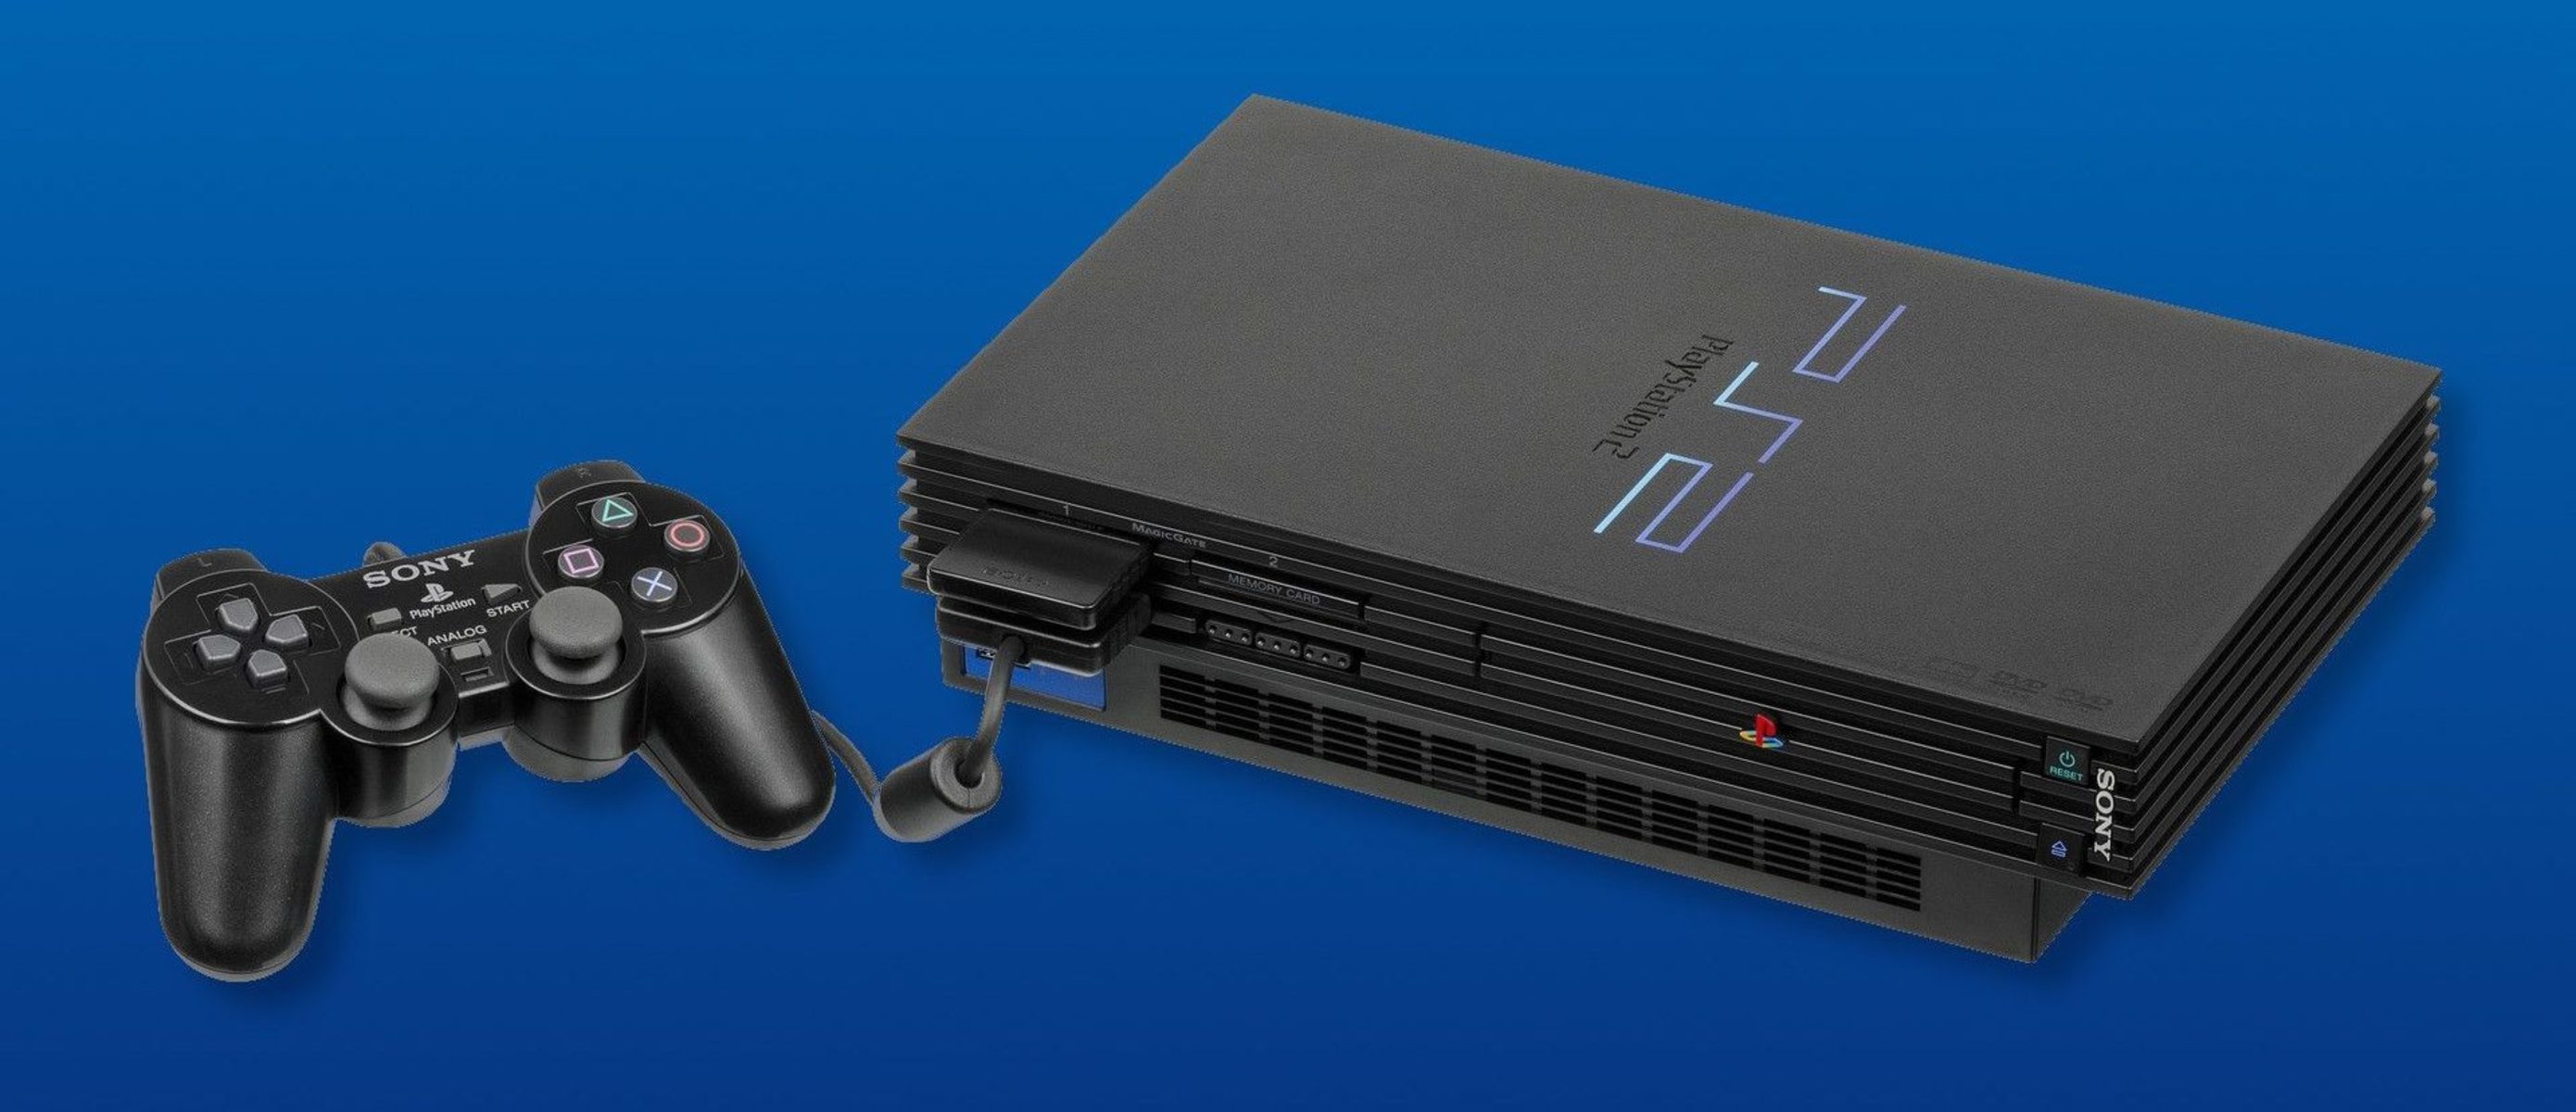 Sony playstation когда вышла. Sony PLAYSTATION 5 ps2. Sony PLAYSTATION 2. Sony PLAYSTATION 2 2000. Sony ps2 Slim.